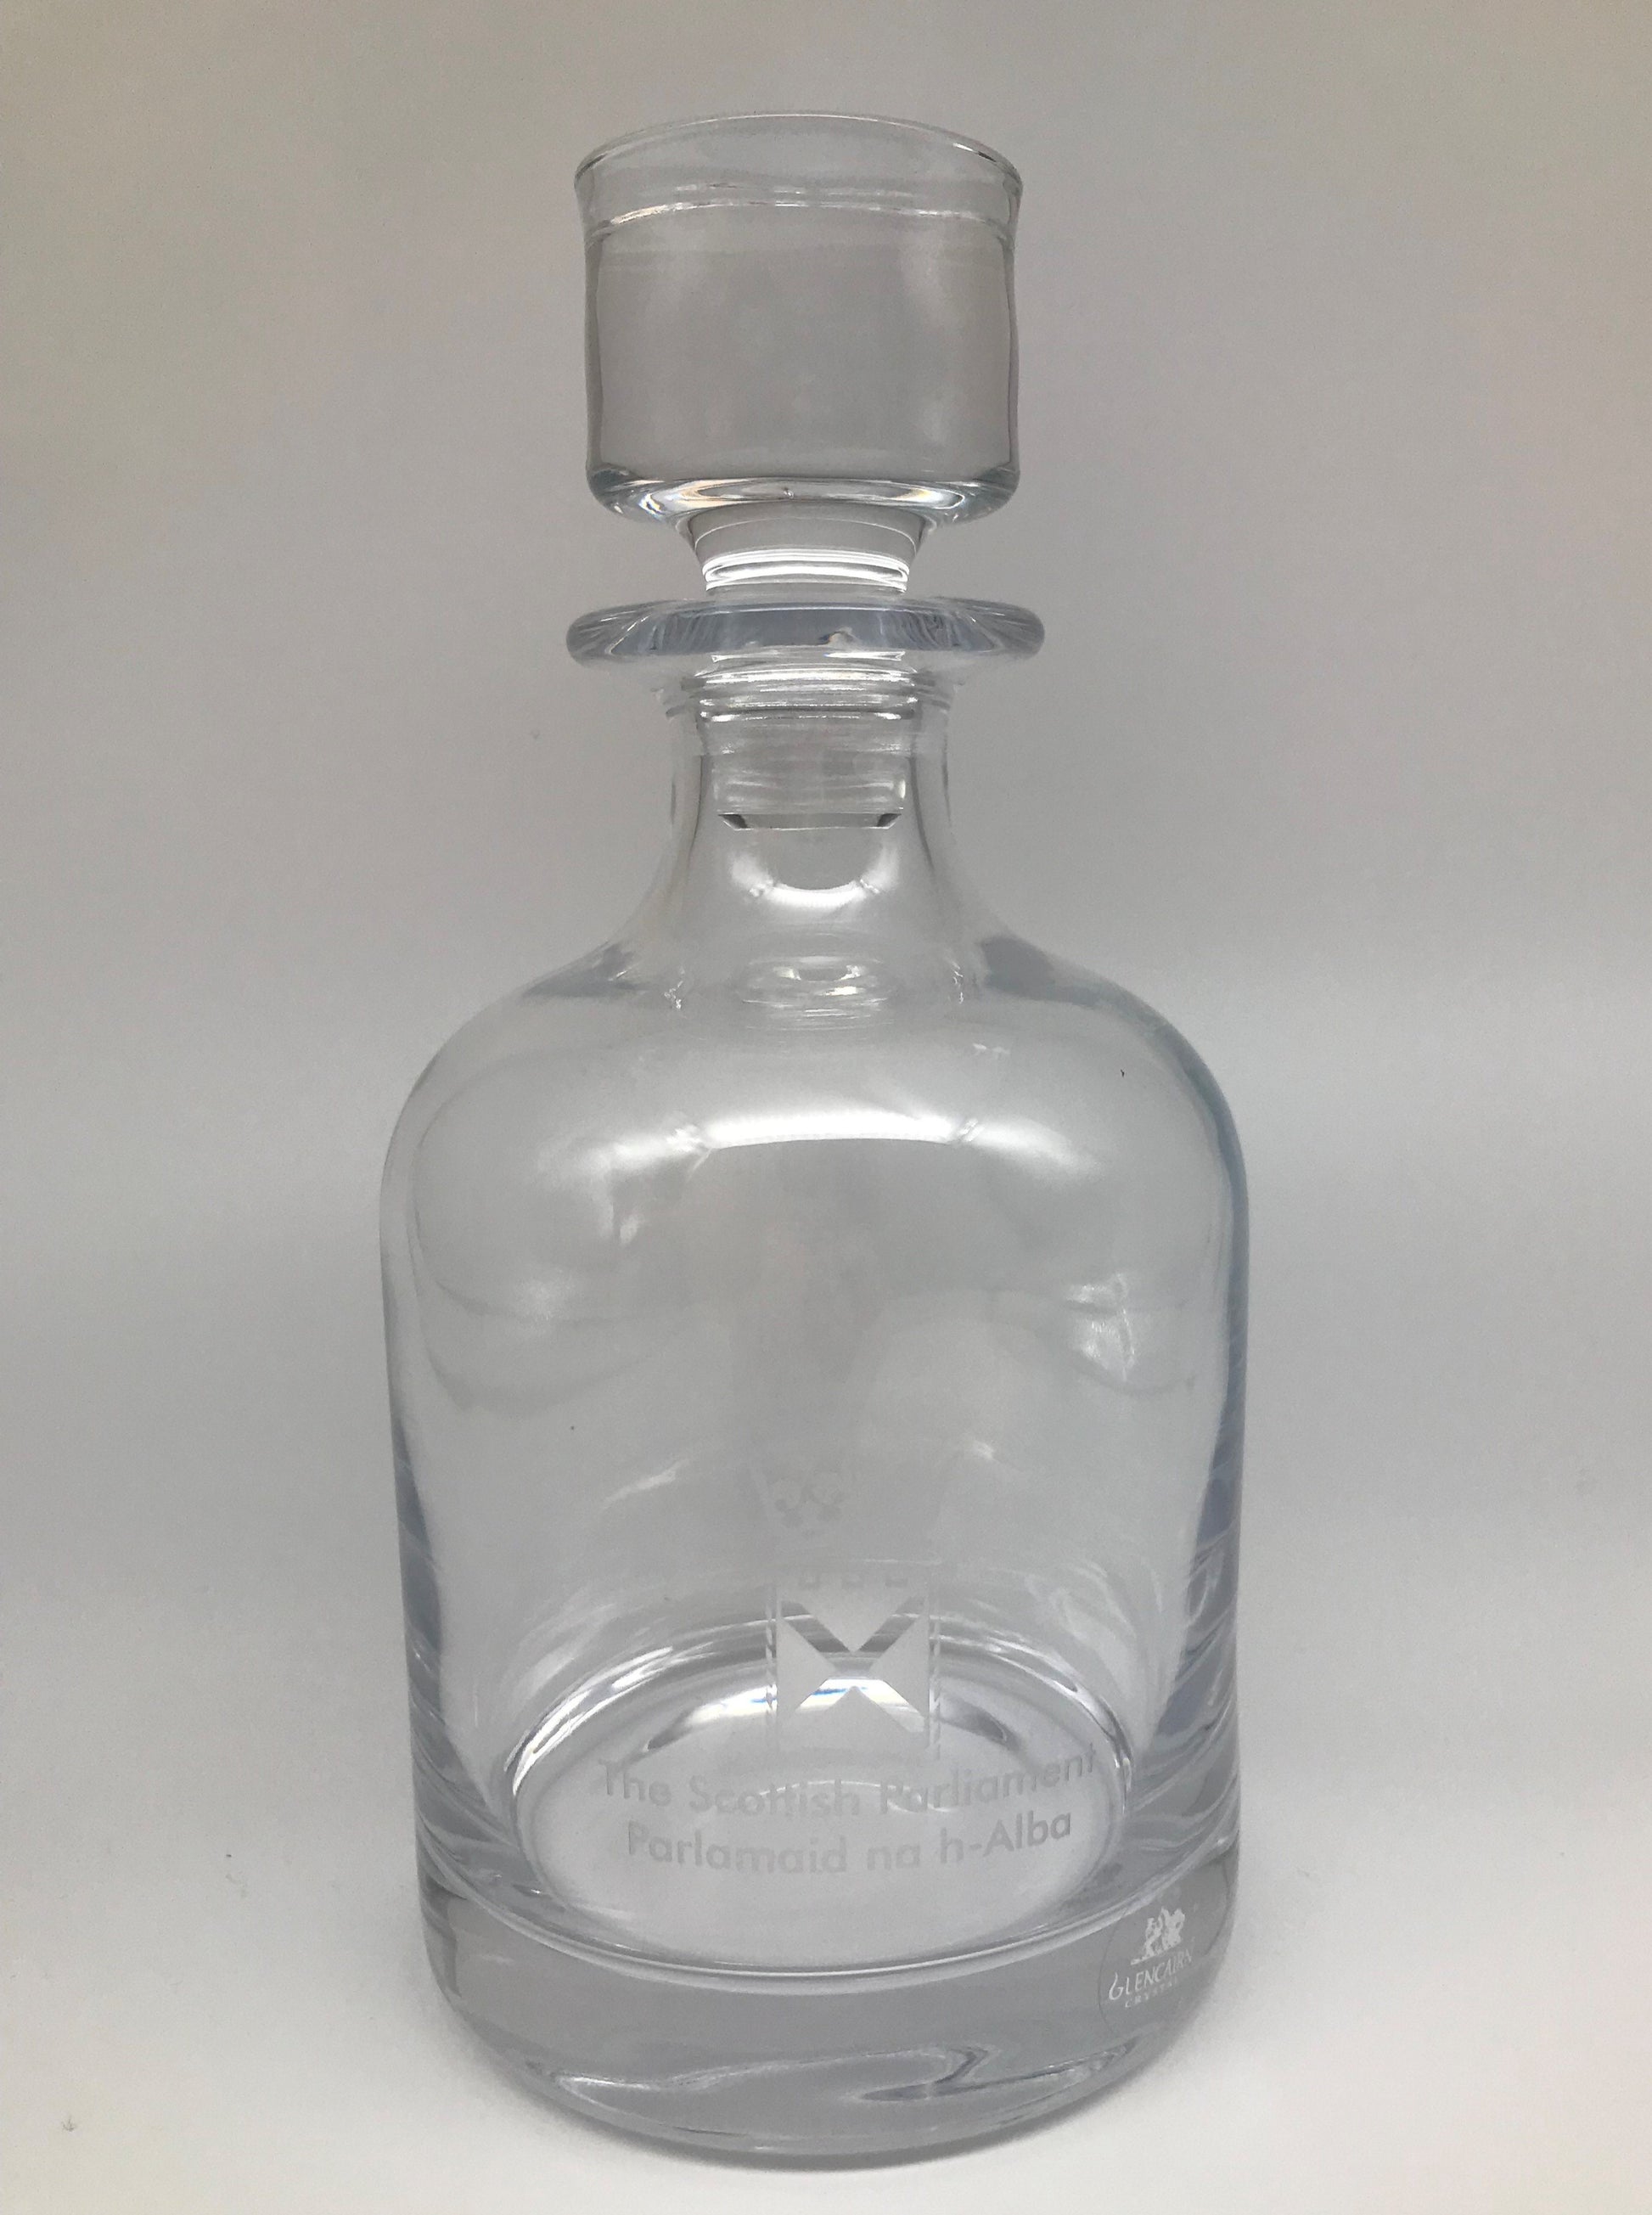 Glass decanter with an engraved symbol of the Scottish Parliament.